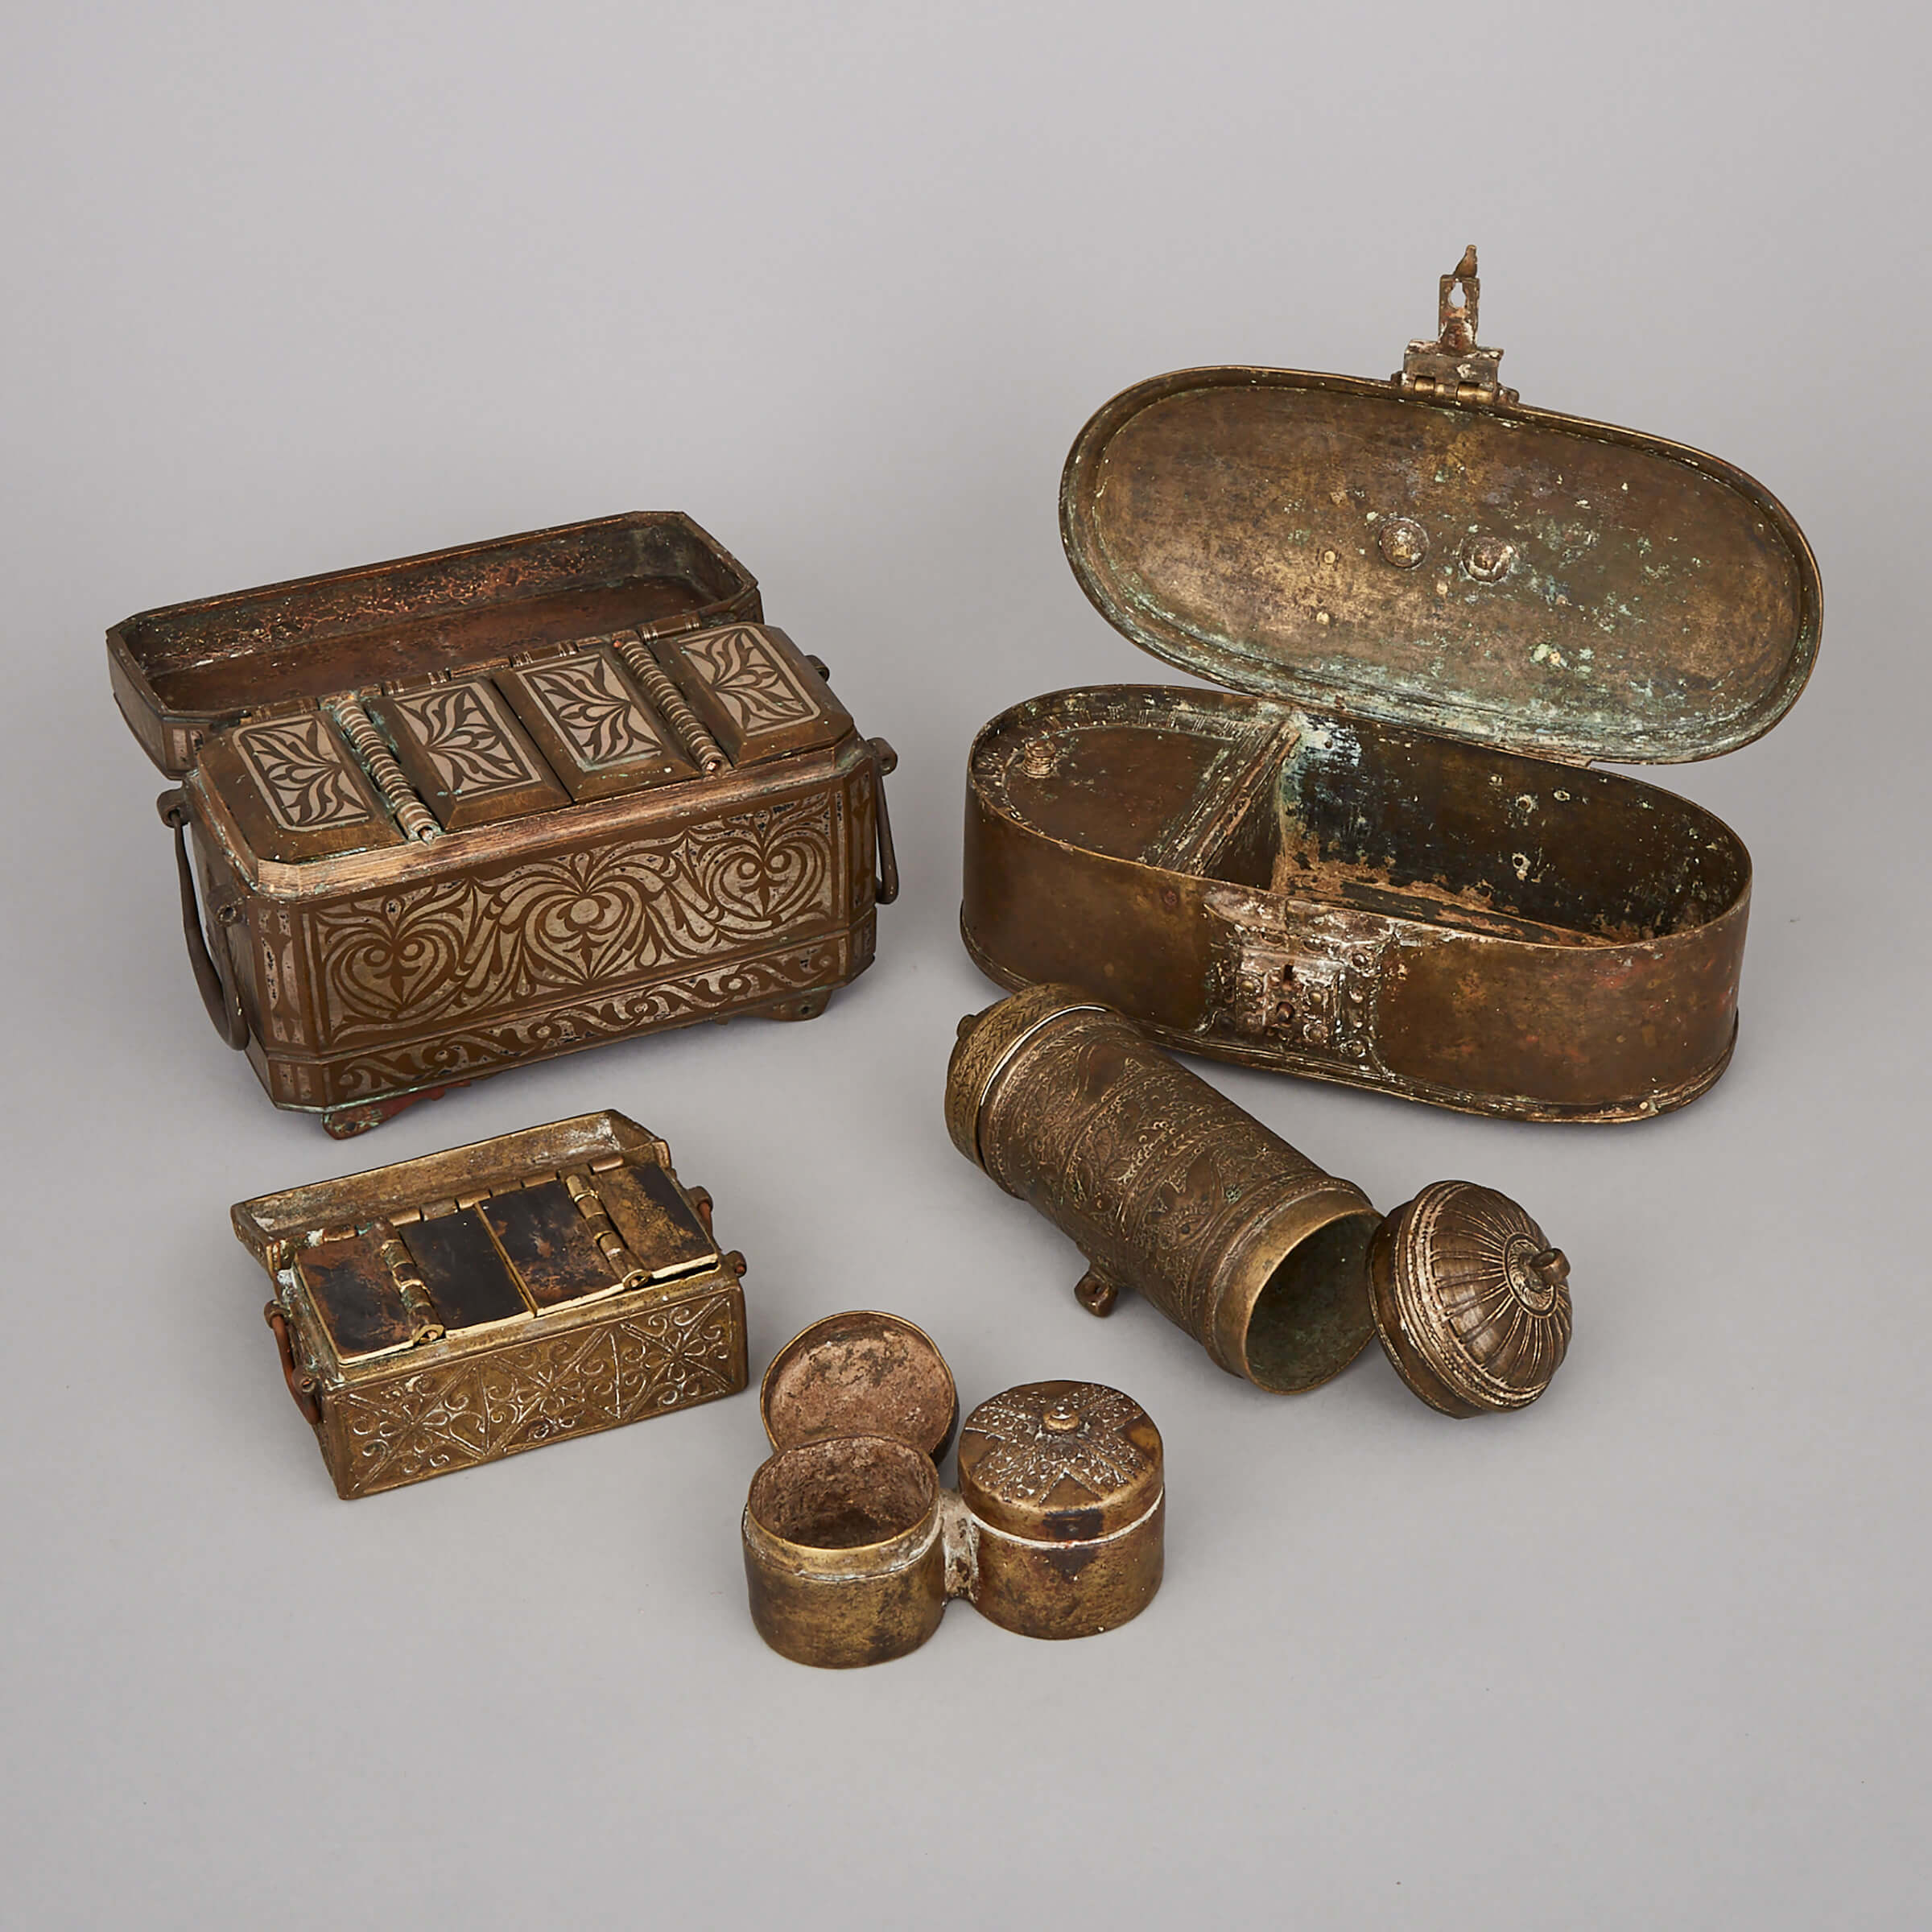 Group of Five Mindanao Brass Betal Boxes, Philippines, Early 20th Century